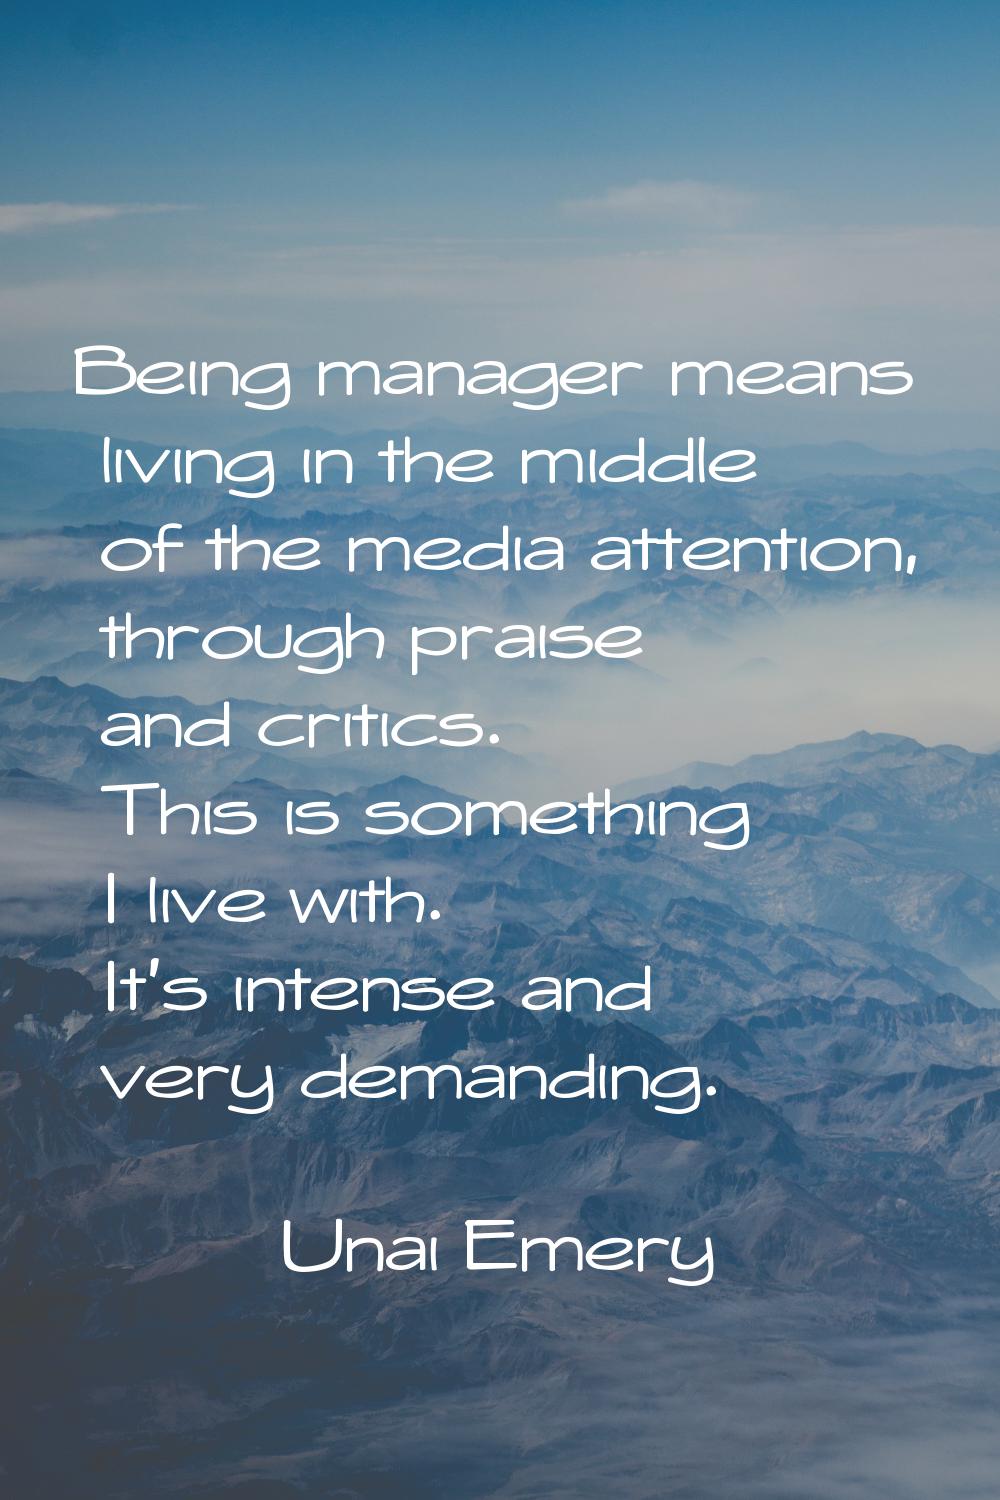 Being manager means living in the middle of the media attention, through praise and critics. This i